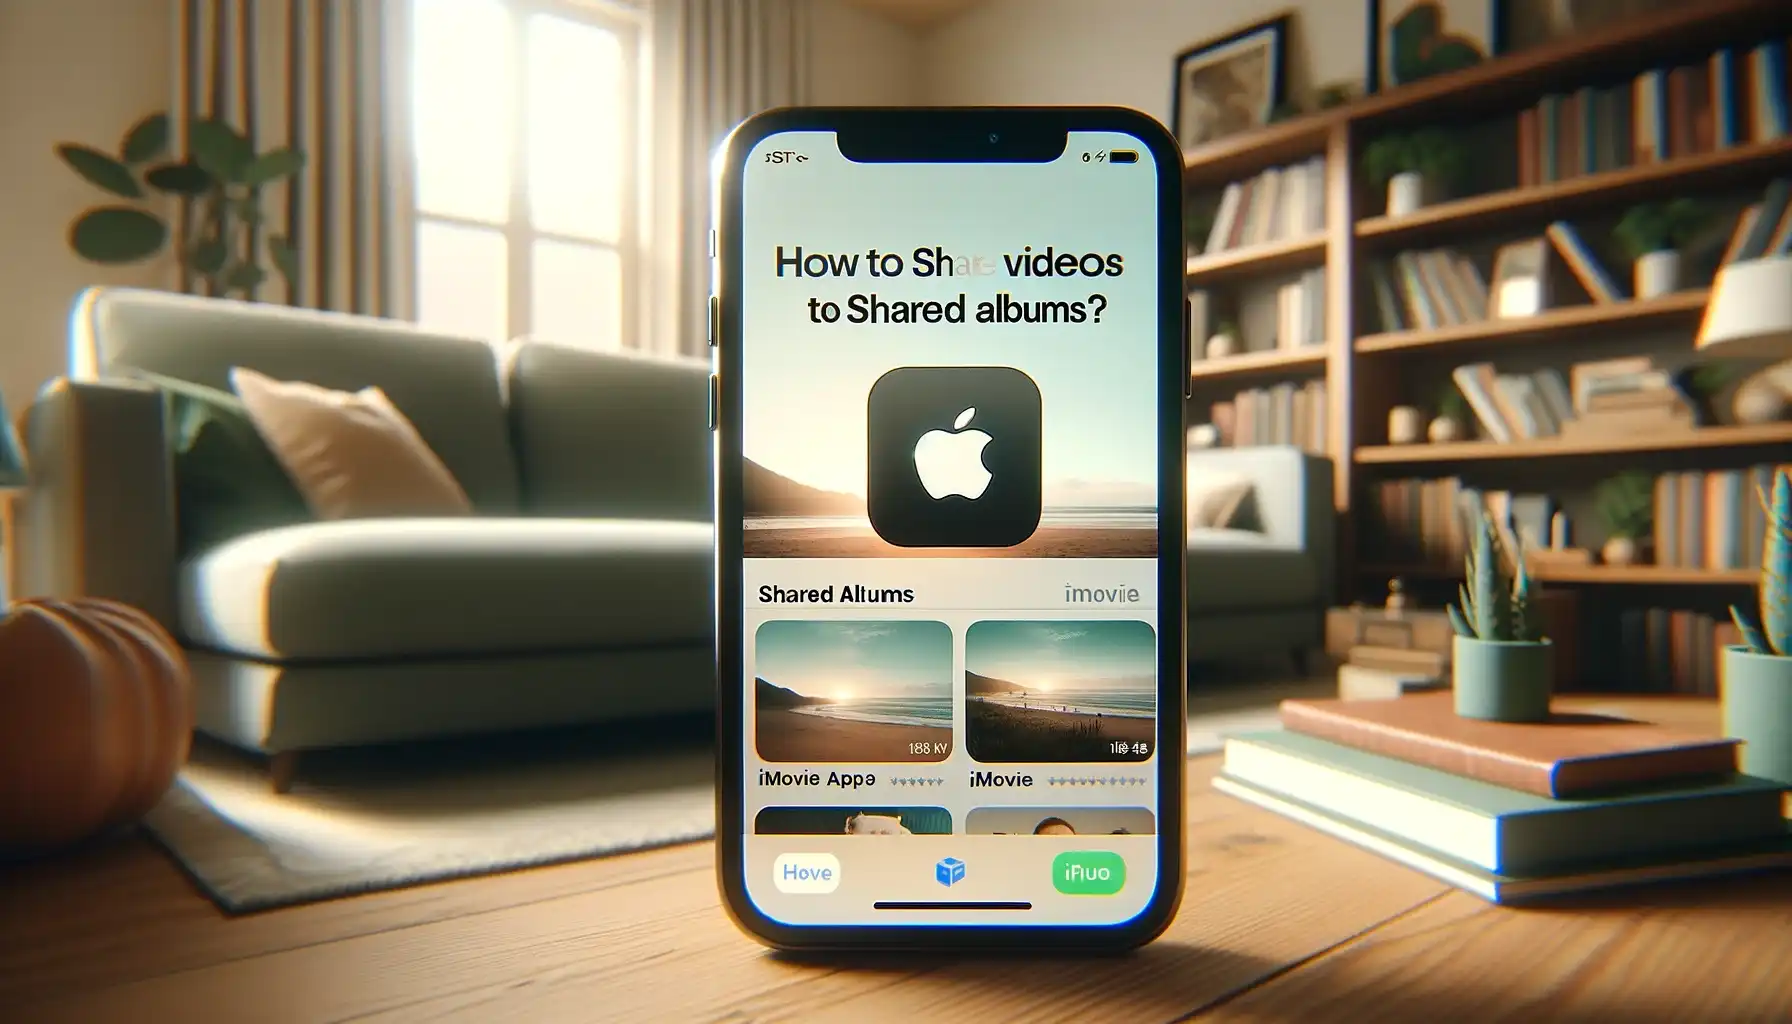 How to Share Videos from iMovie to Shared Albums on iPhone?